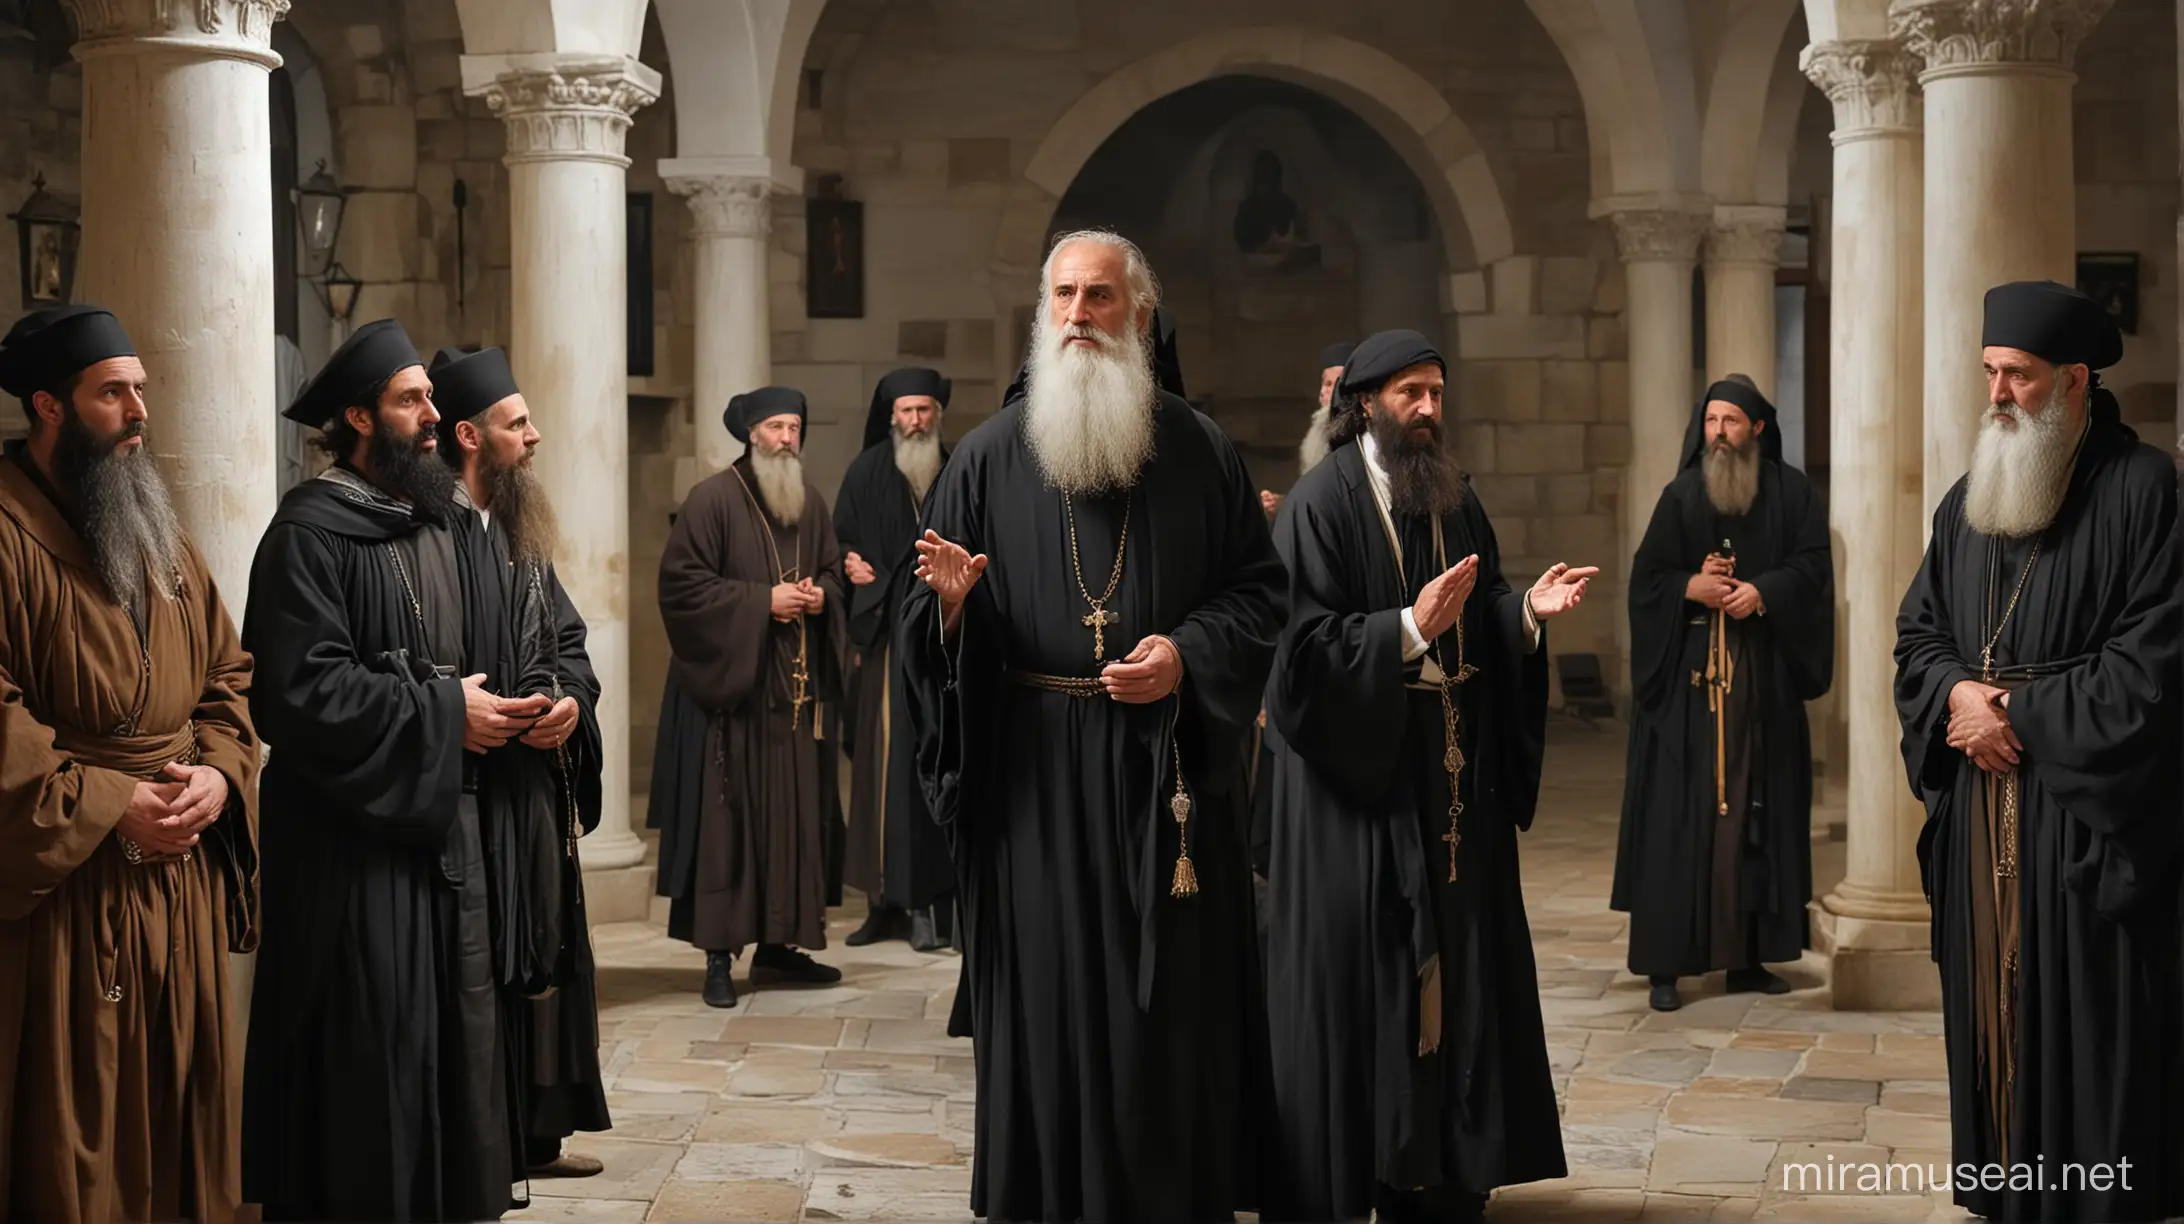 Saint Cosmas of Aetolia Receives Blessing from Orthodox Patriarch and Teacher in Monastery of Athos